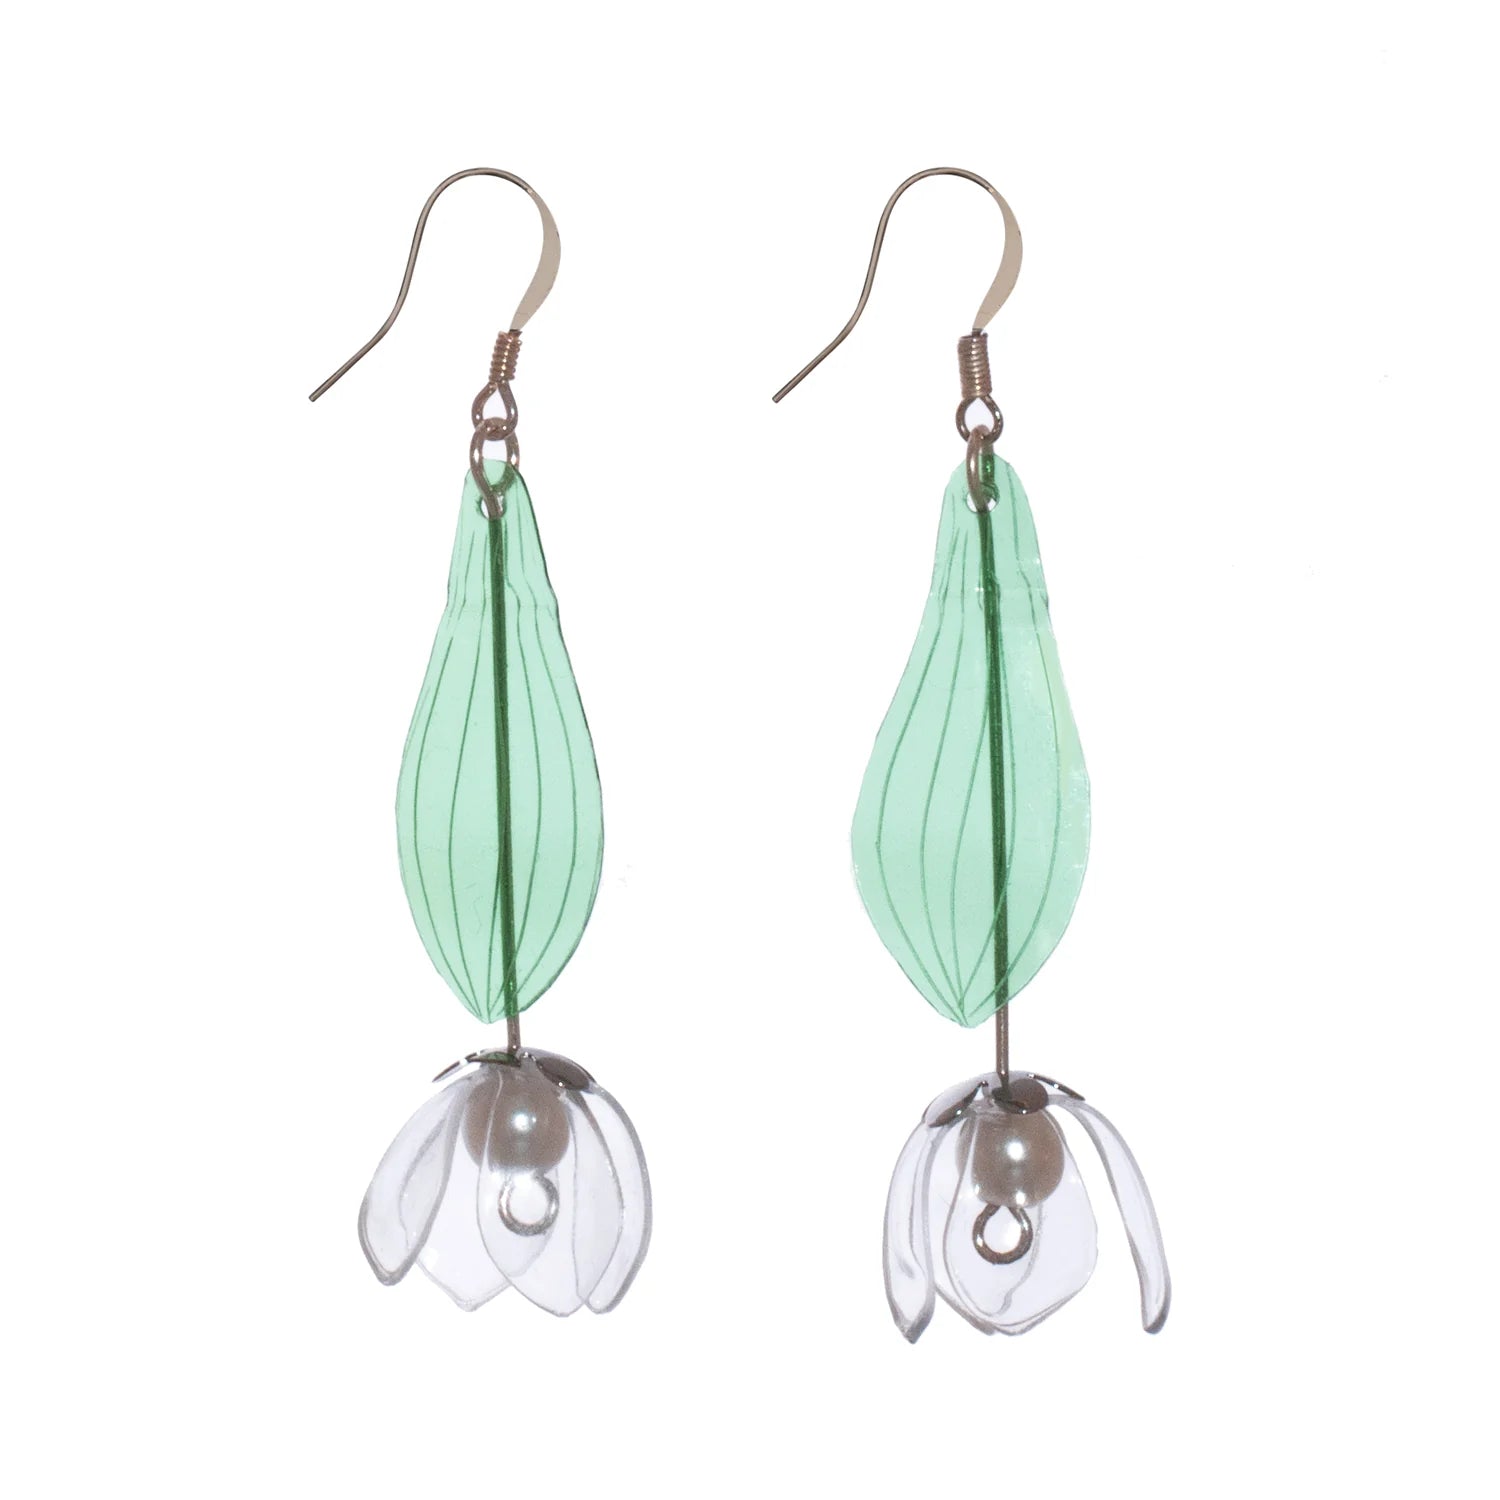 Just a flower earrings, Lily of the Valley